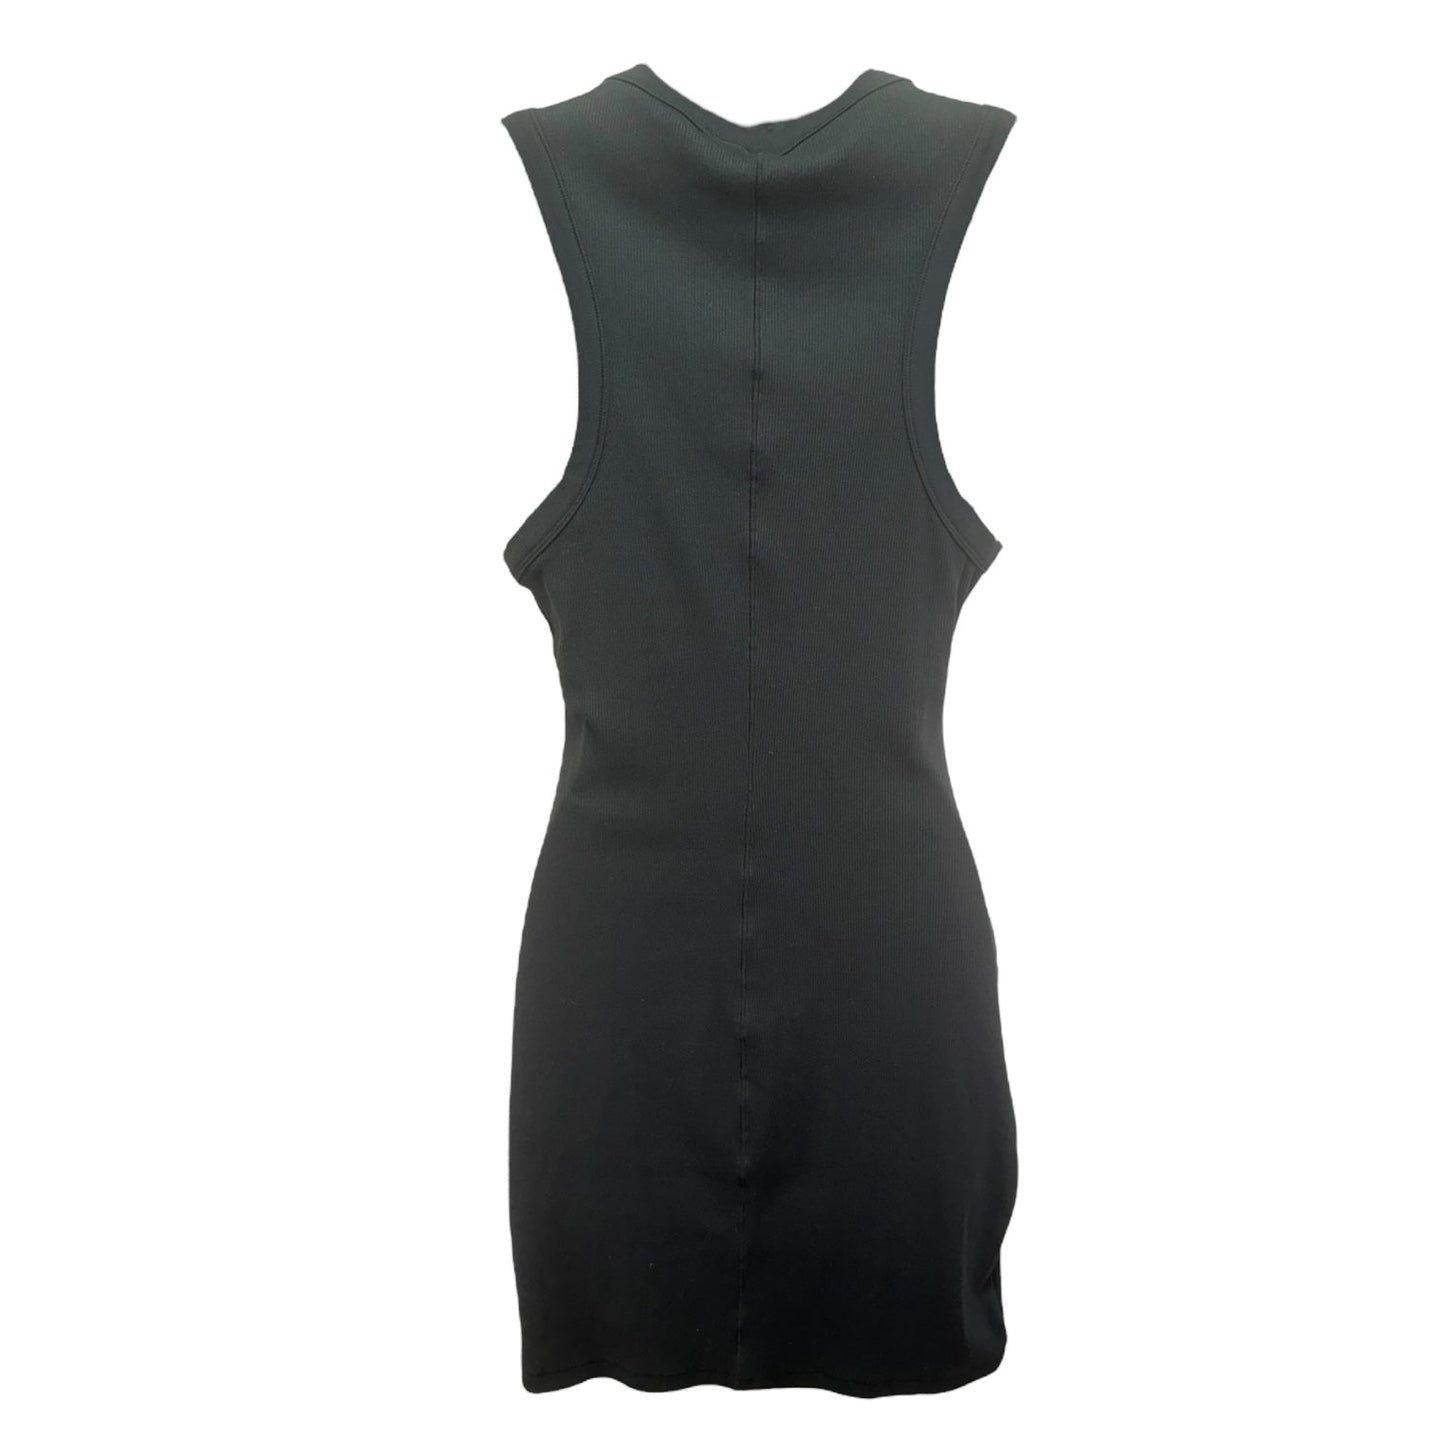 Cotton Ribbed Tank Dress in Soot SKIMS, Size L